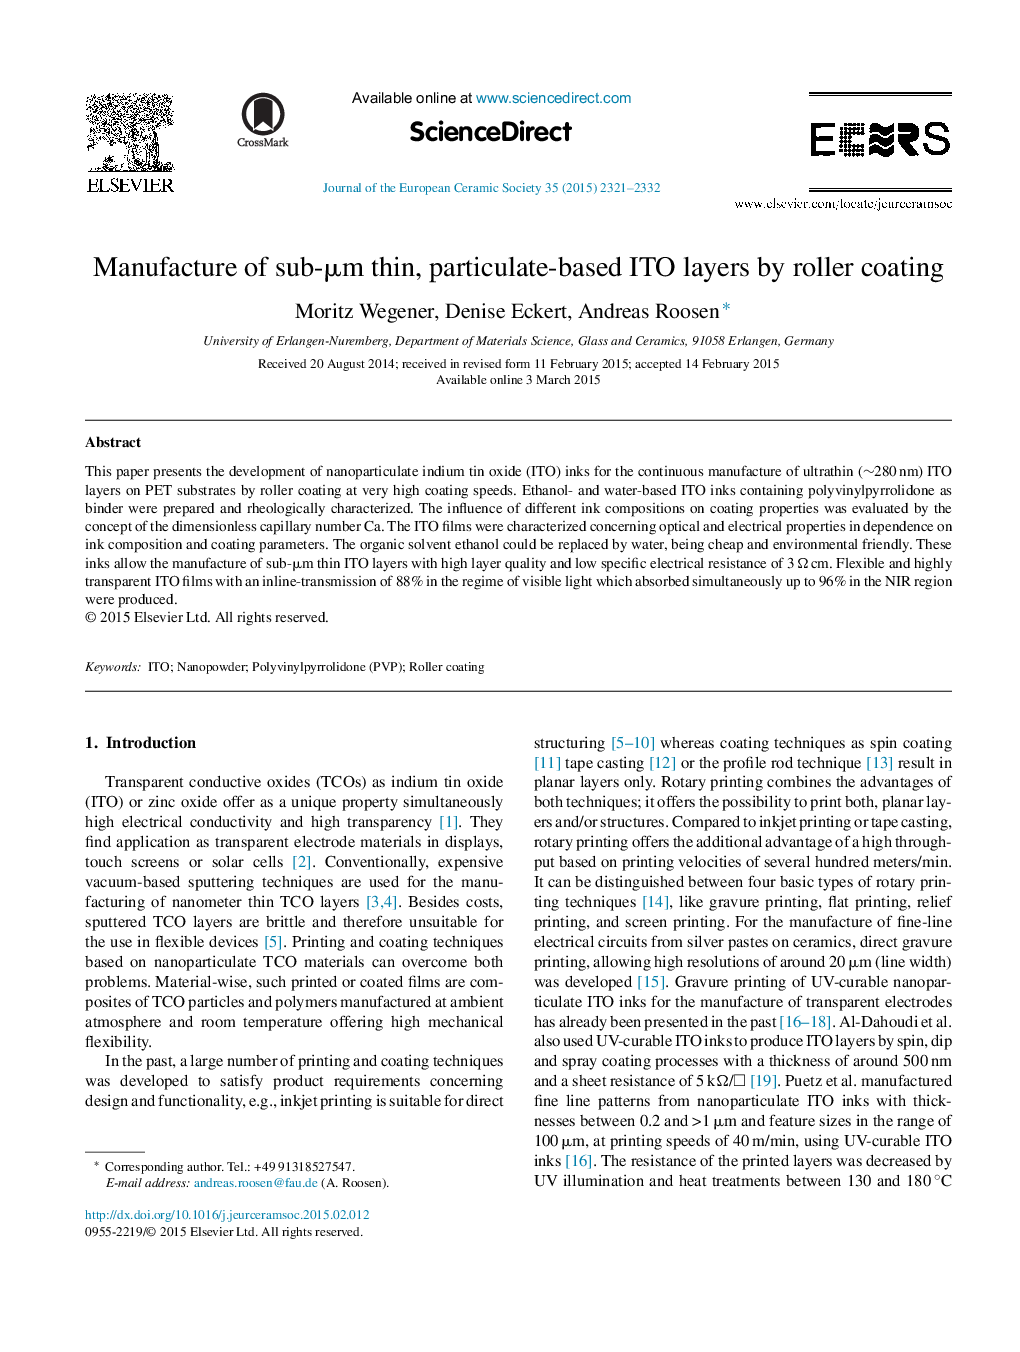 Manufacture of sub-Î¼m thin, particulate-based ITO layers by roller coating